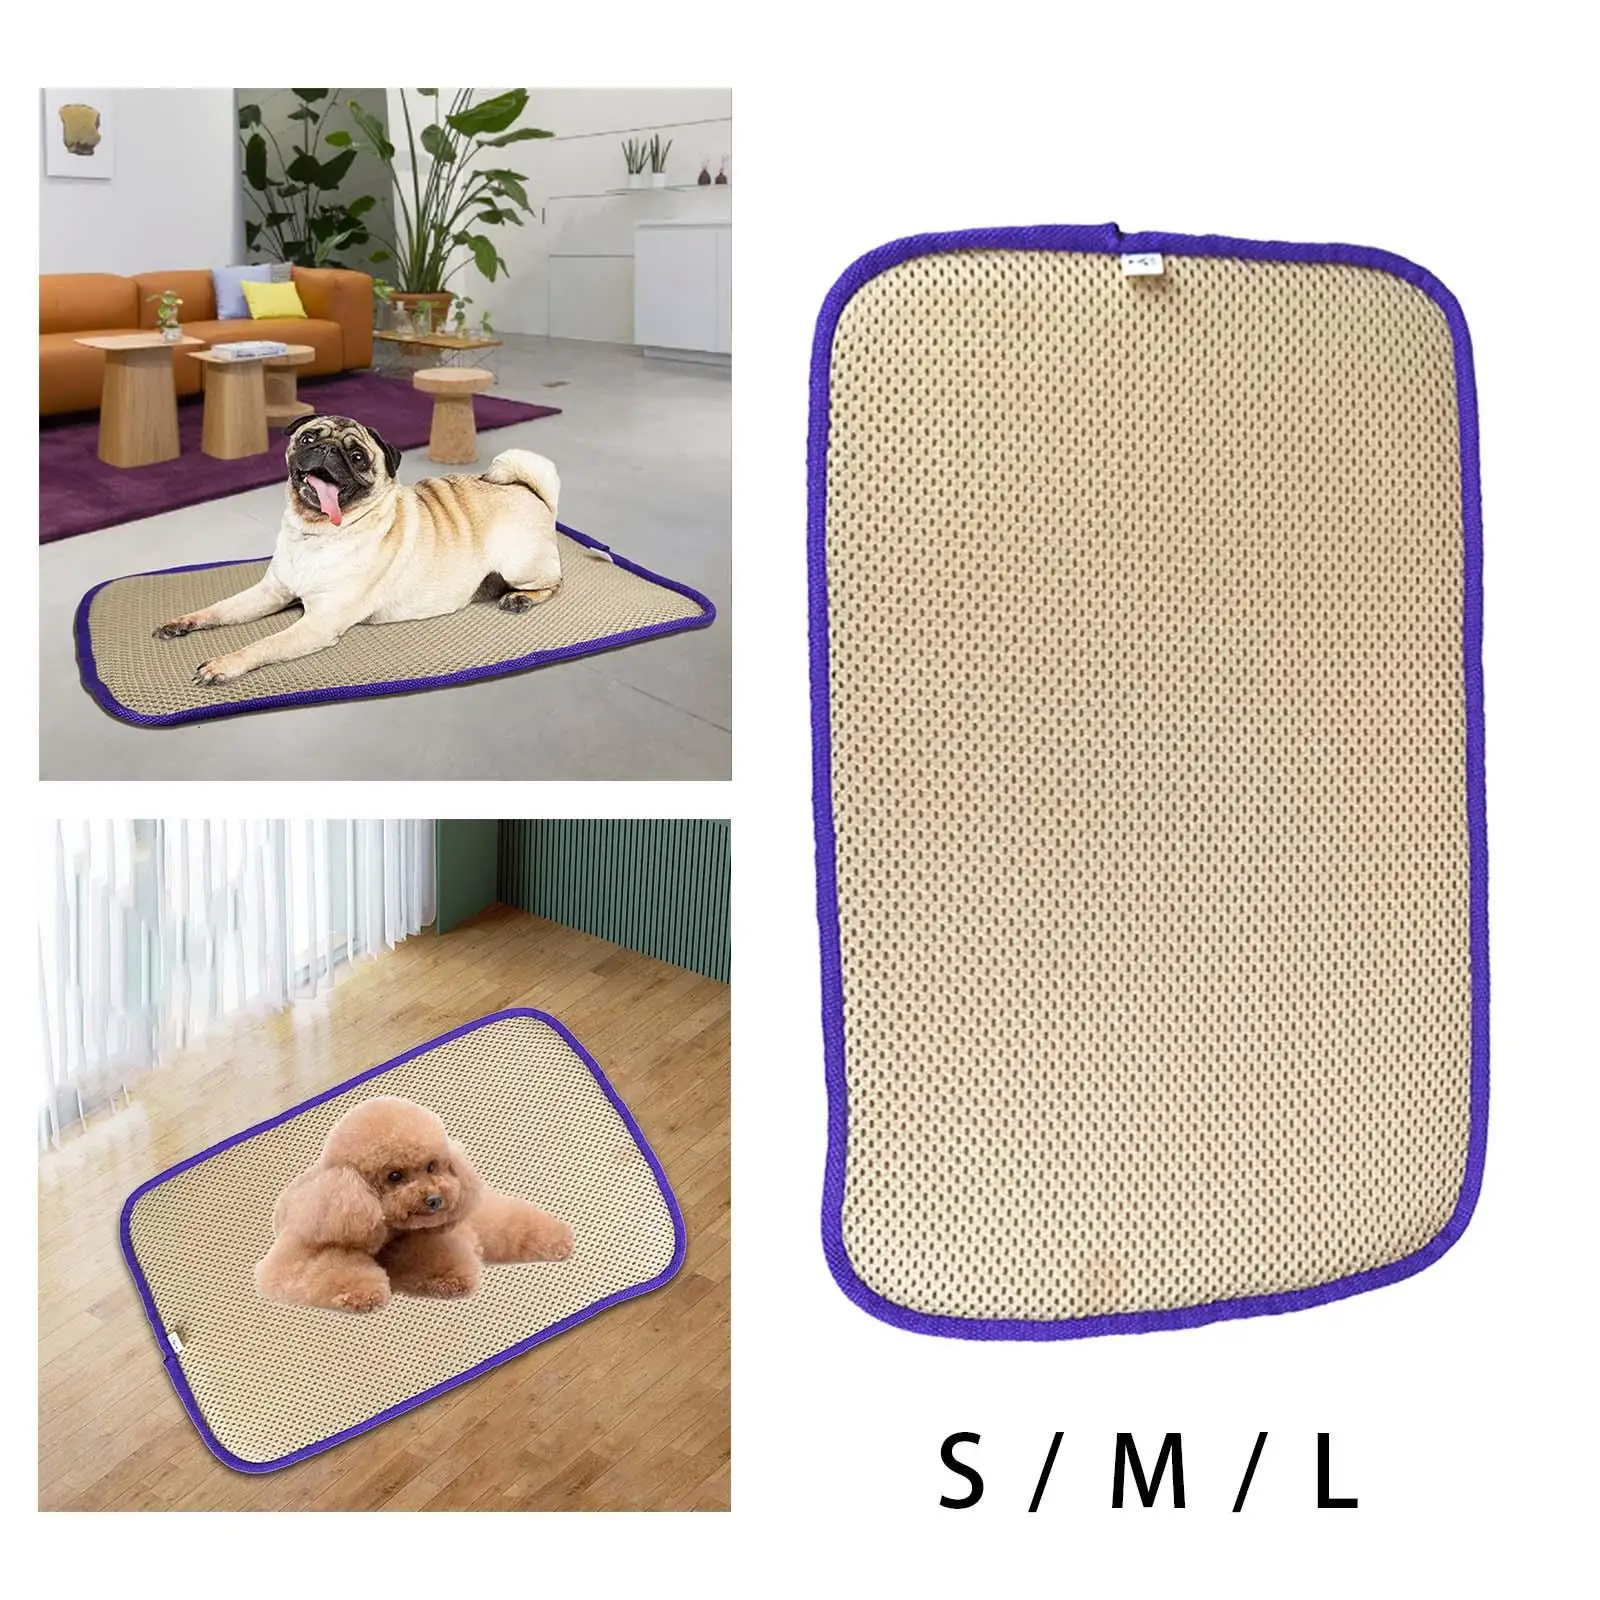 Dog Cooling Mat Dog Pad Blanket Cat Cooling Blanket Puppy Sleep Cushion Pet Cool Mat Sleeping Bed for Sofa Bed Car